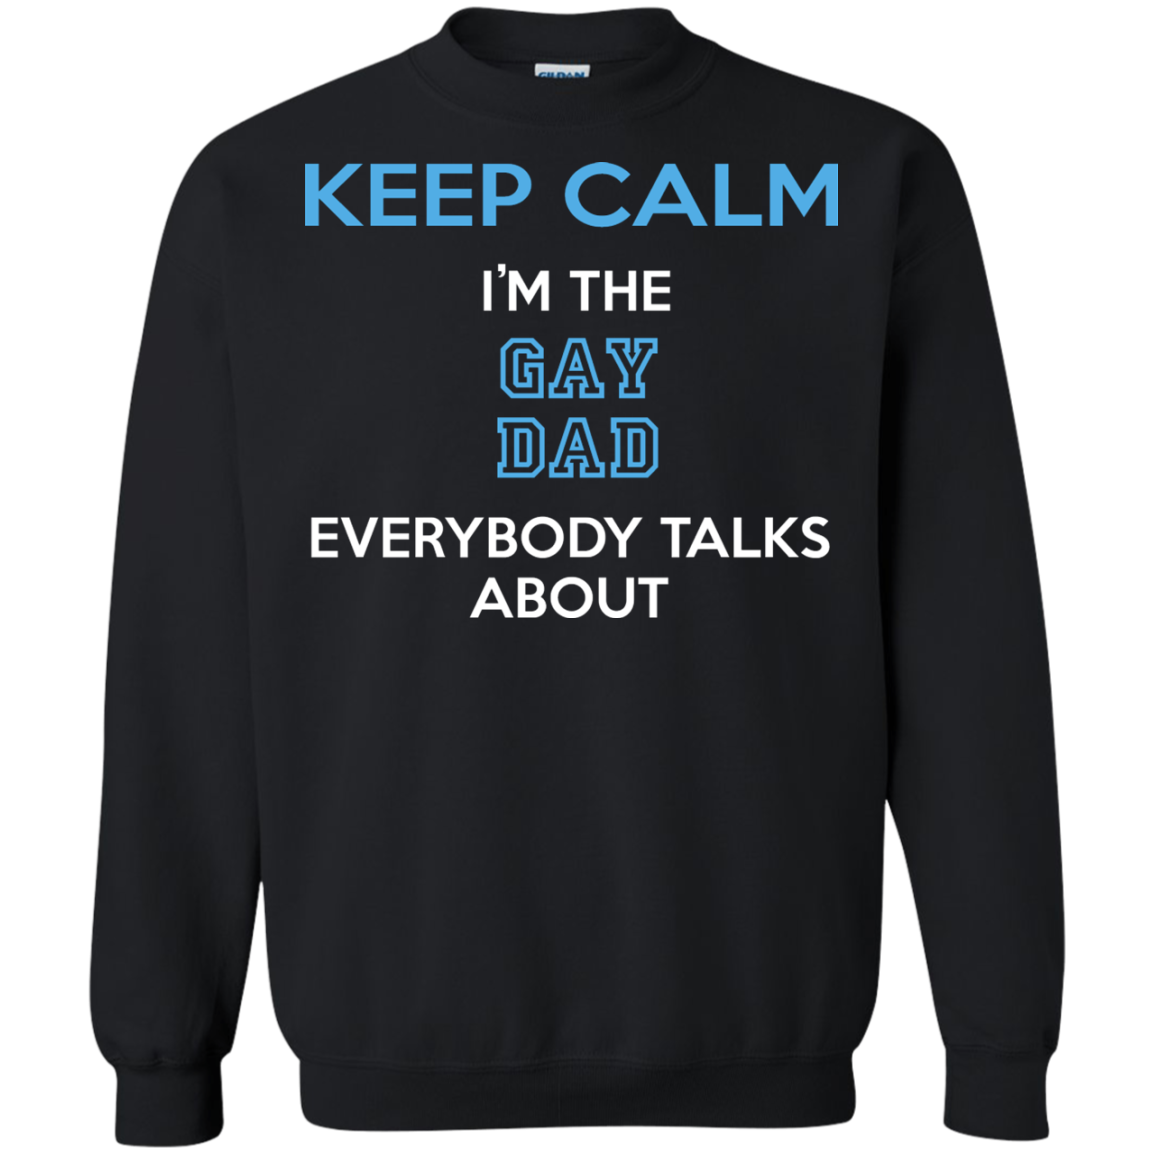 Keep Calm I'm The Gay Dad Everybody Talks About Shirt